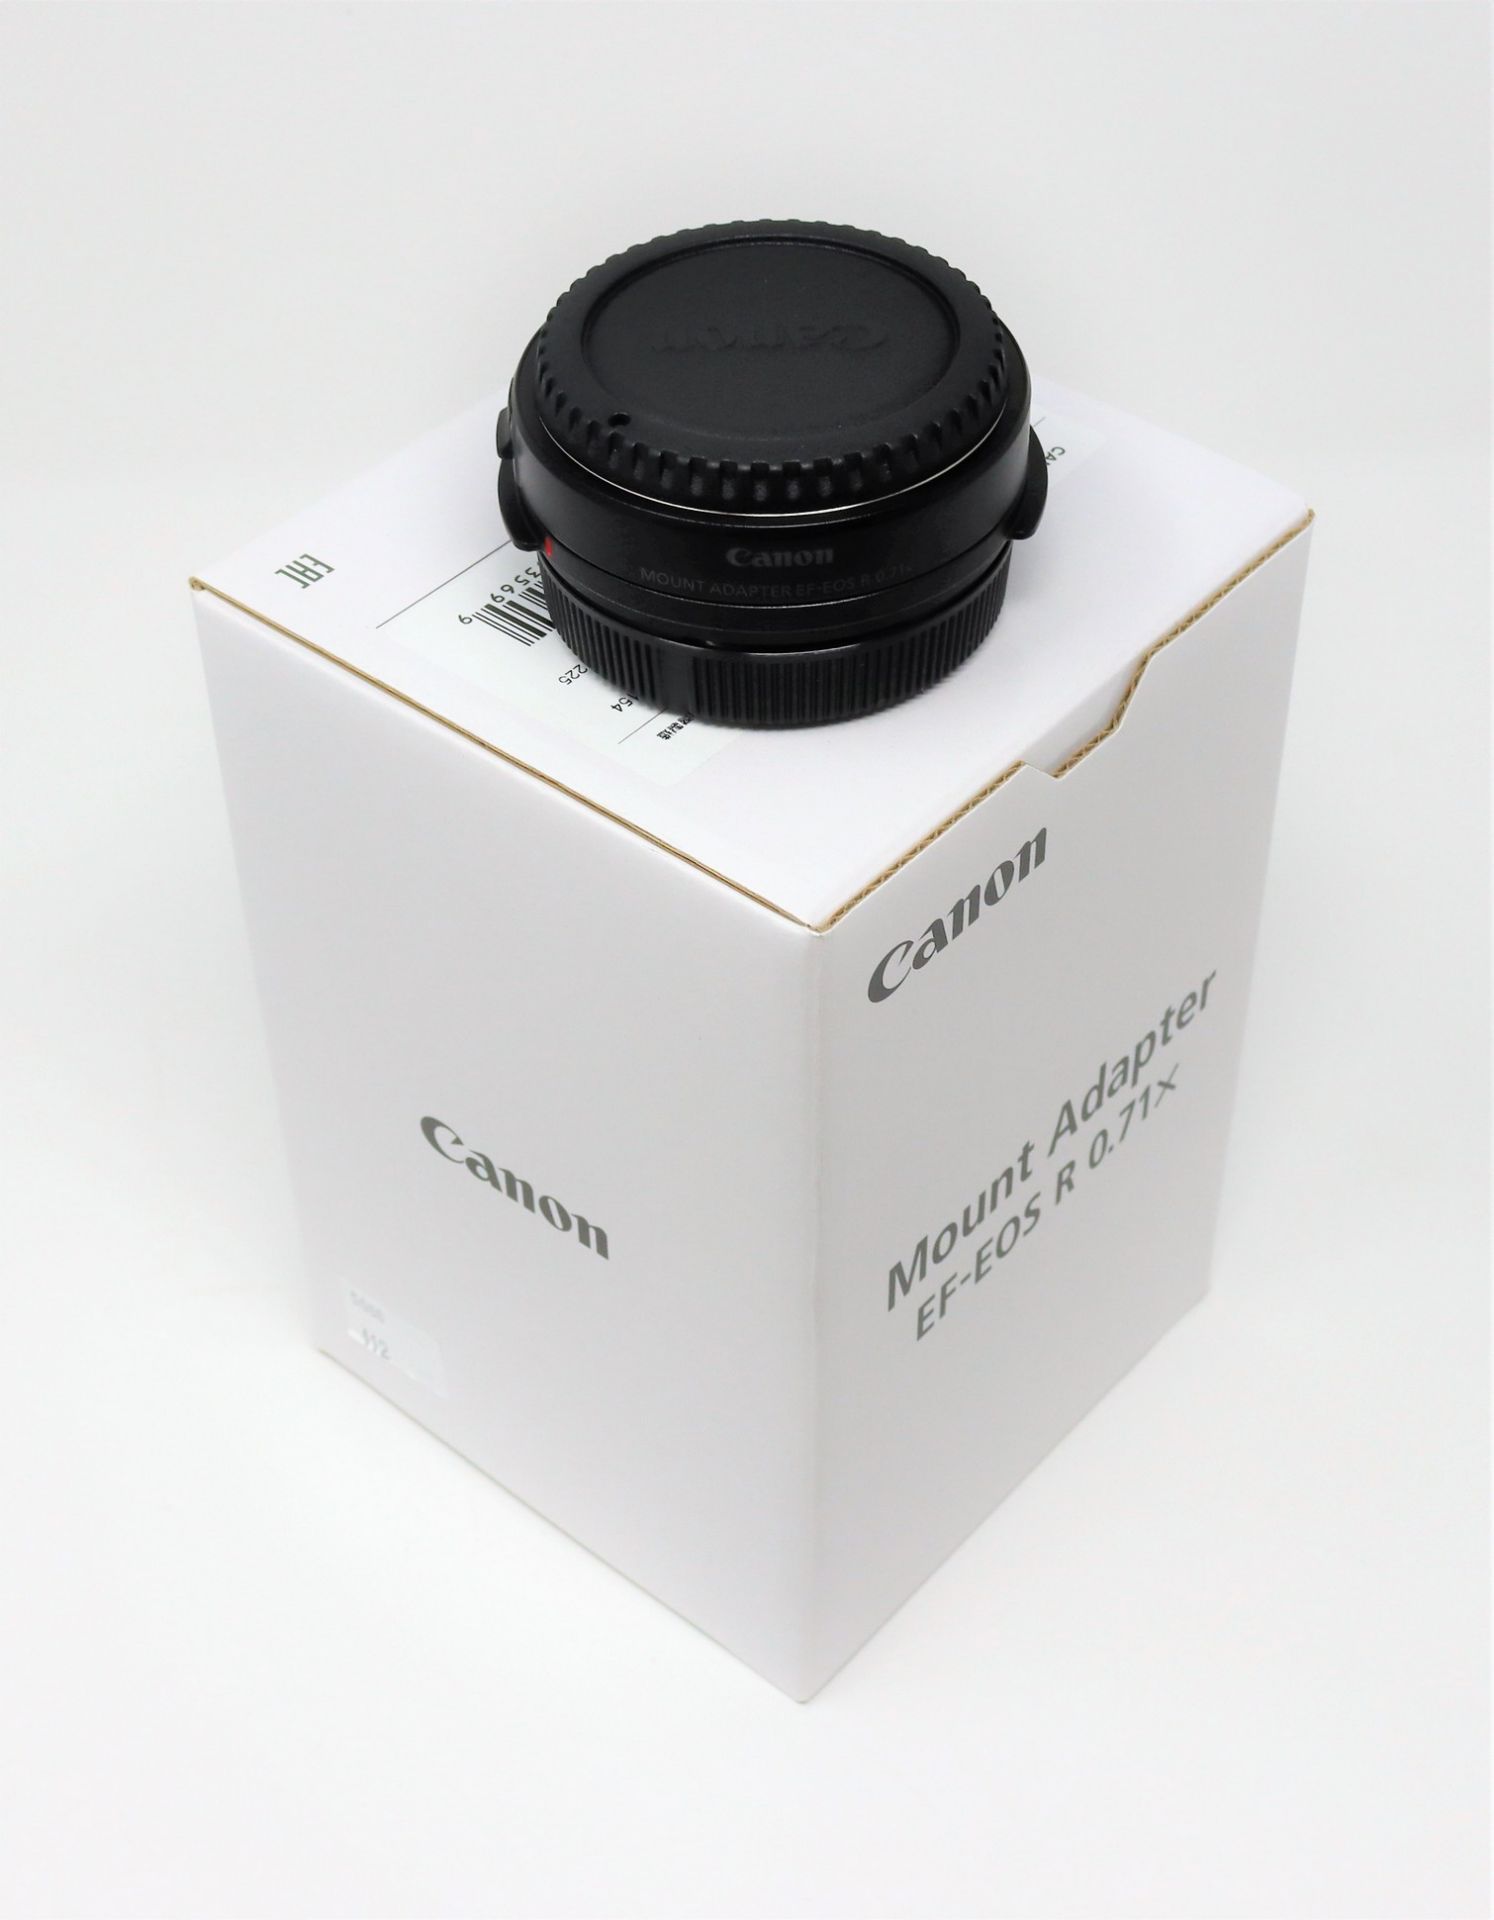 A boxed as new Canon EF-EOS R 0.71x Mount Adapter.